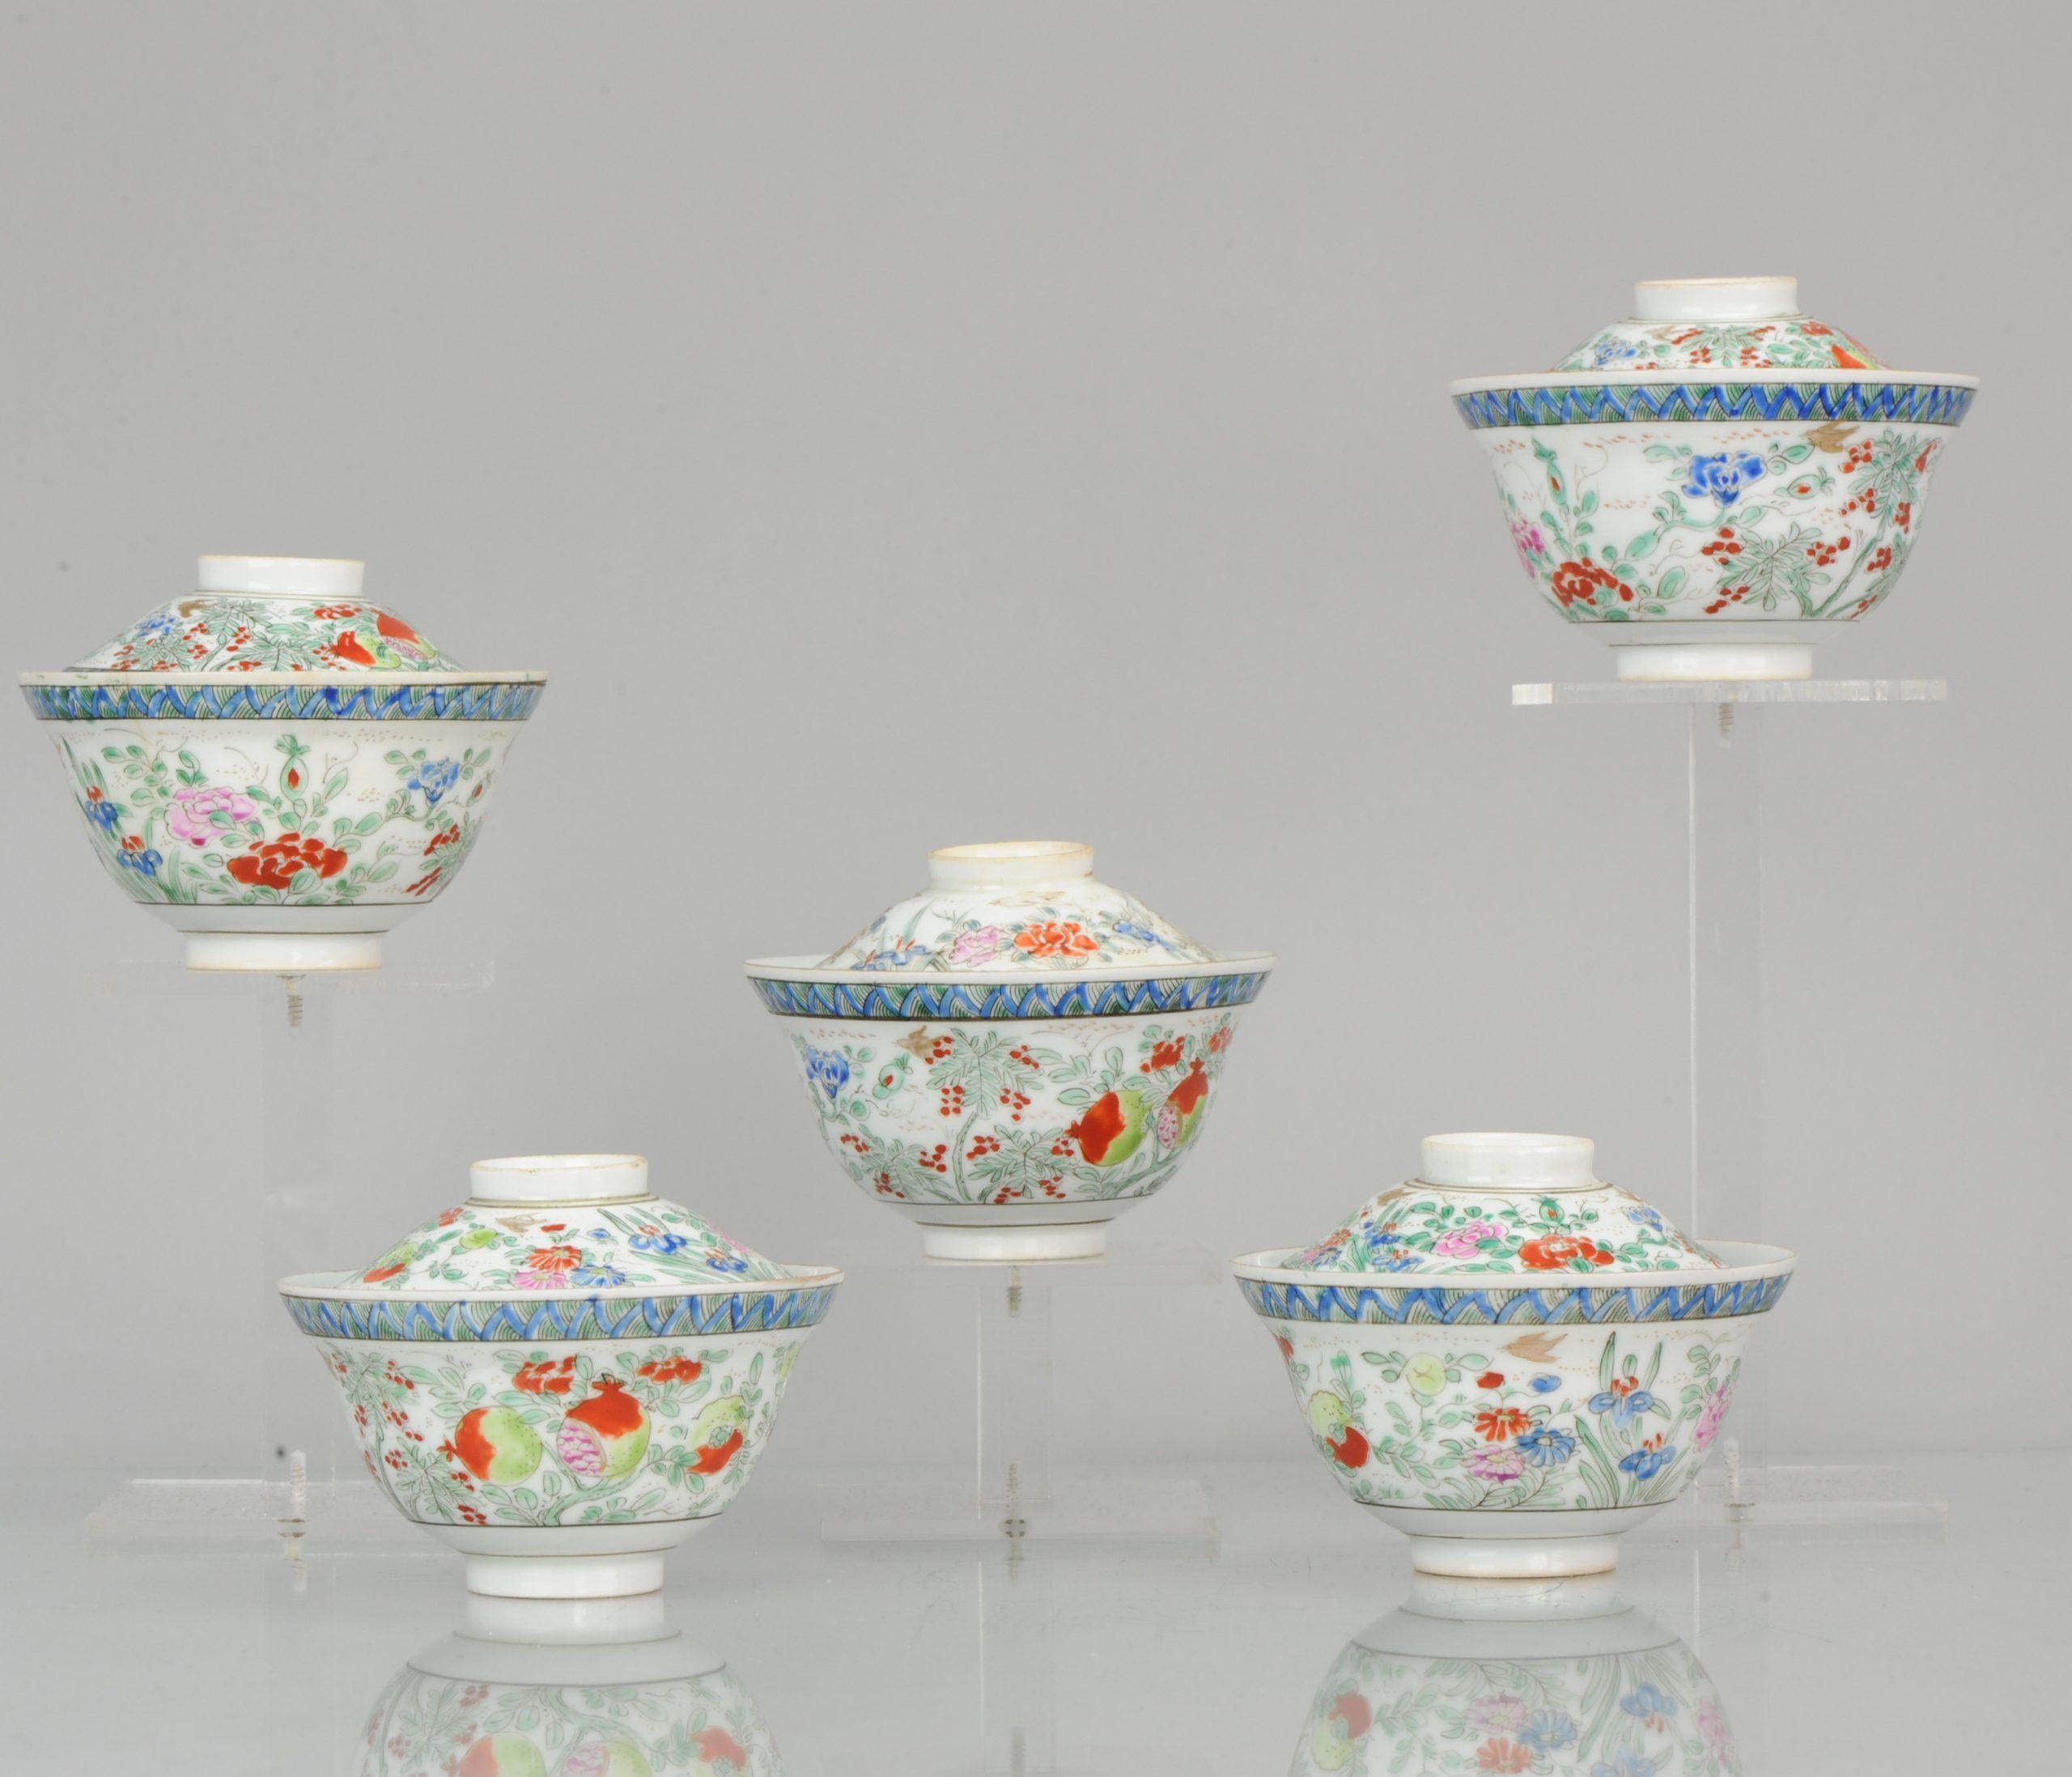 A very nice set of 6 tea bowls with saucer decorated with flowers and pommegranat. They are marked on the base. Decoration for the SE Asian market. Straits style.

Additional information:
Material: Porcelain & Pottery
Region of Origin: Japan
Period: